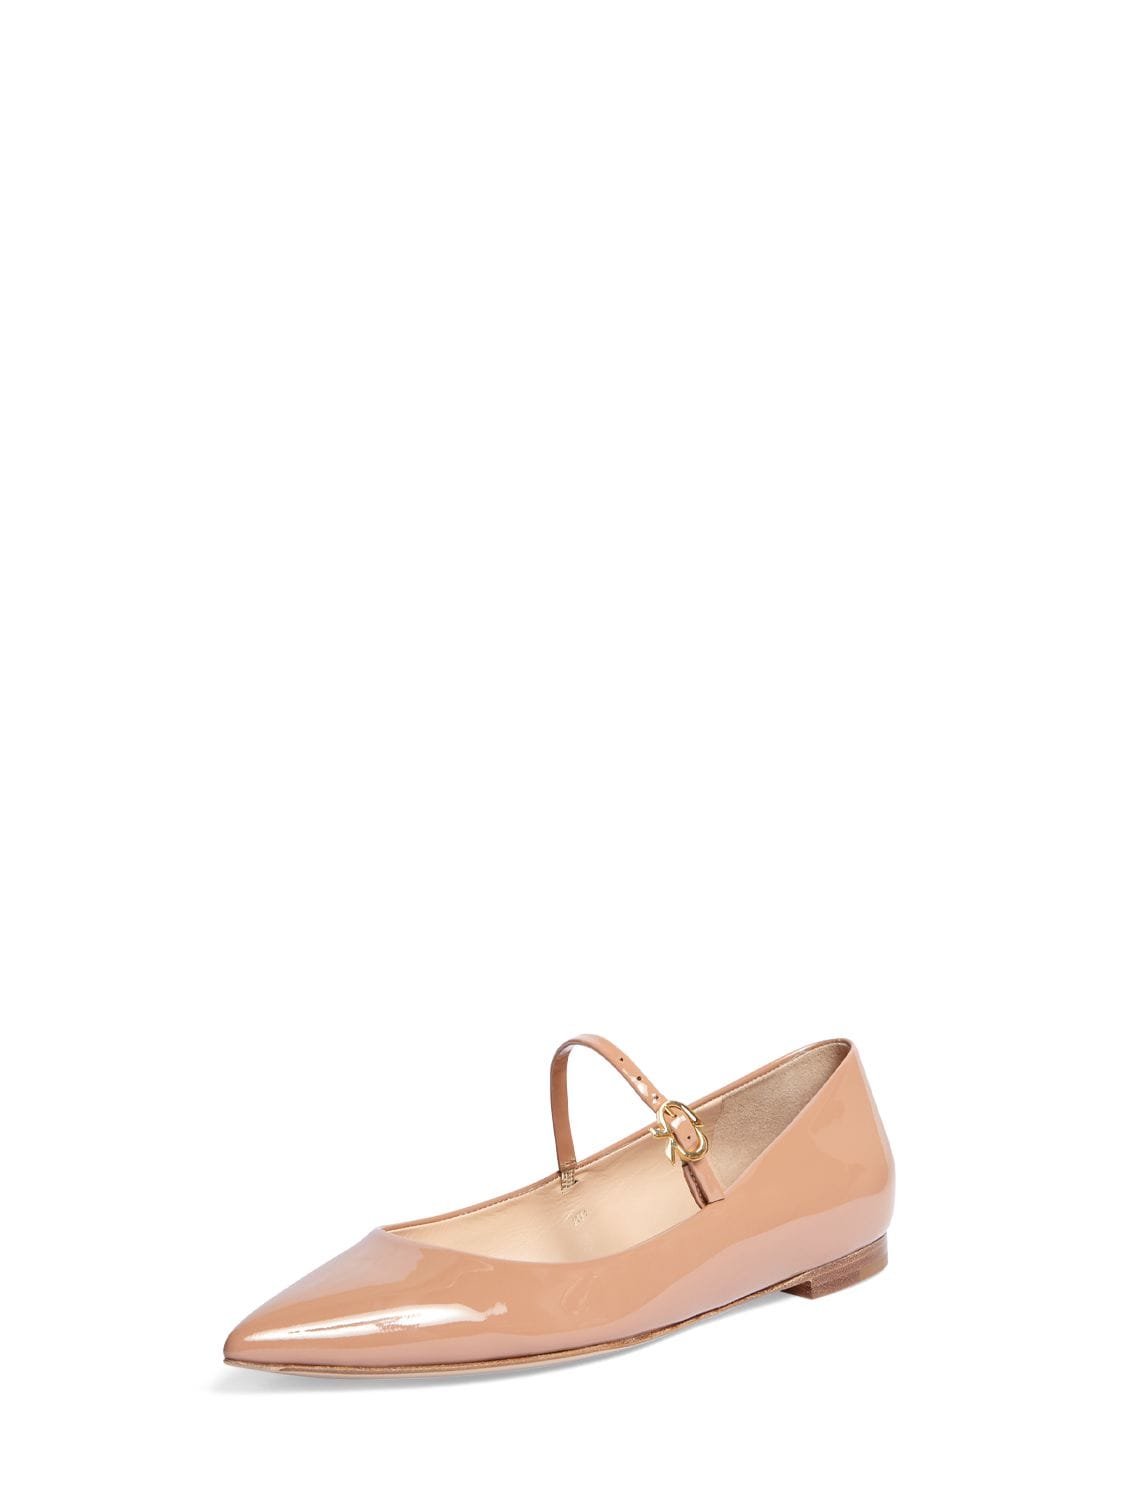 Gianvito Rossi Ribbon Patent Leather Mary Jane Flats In Nude